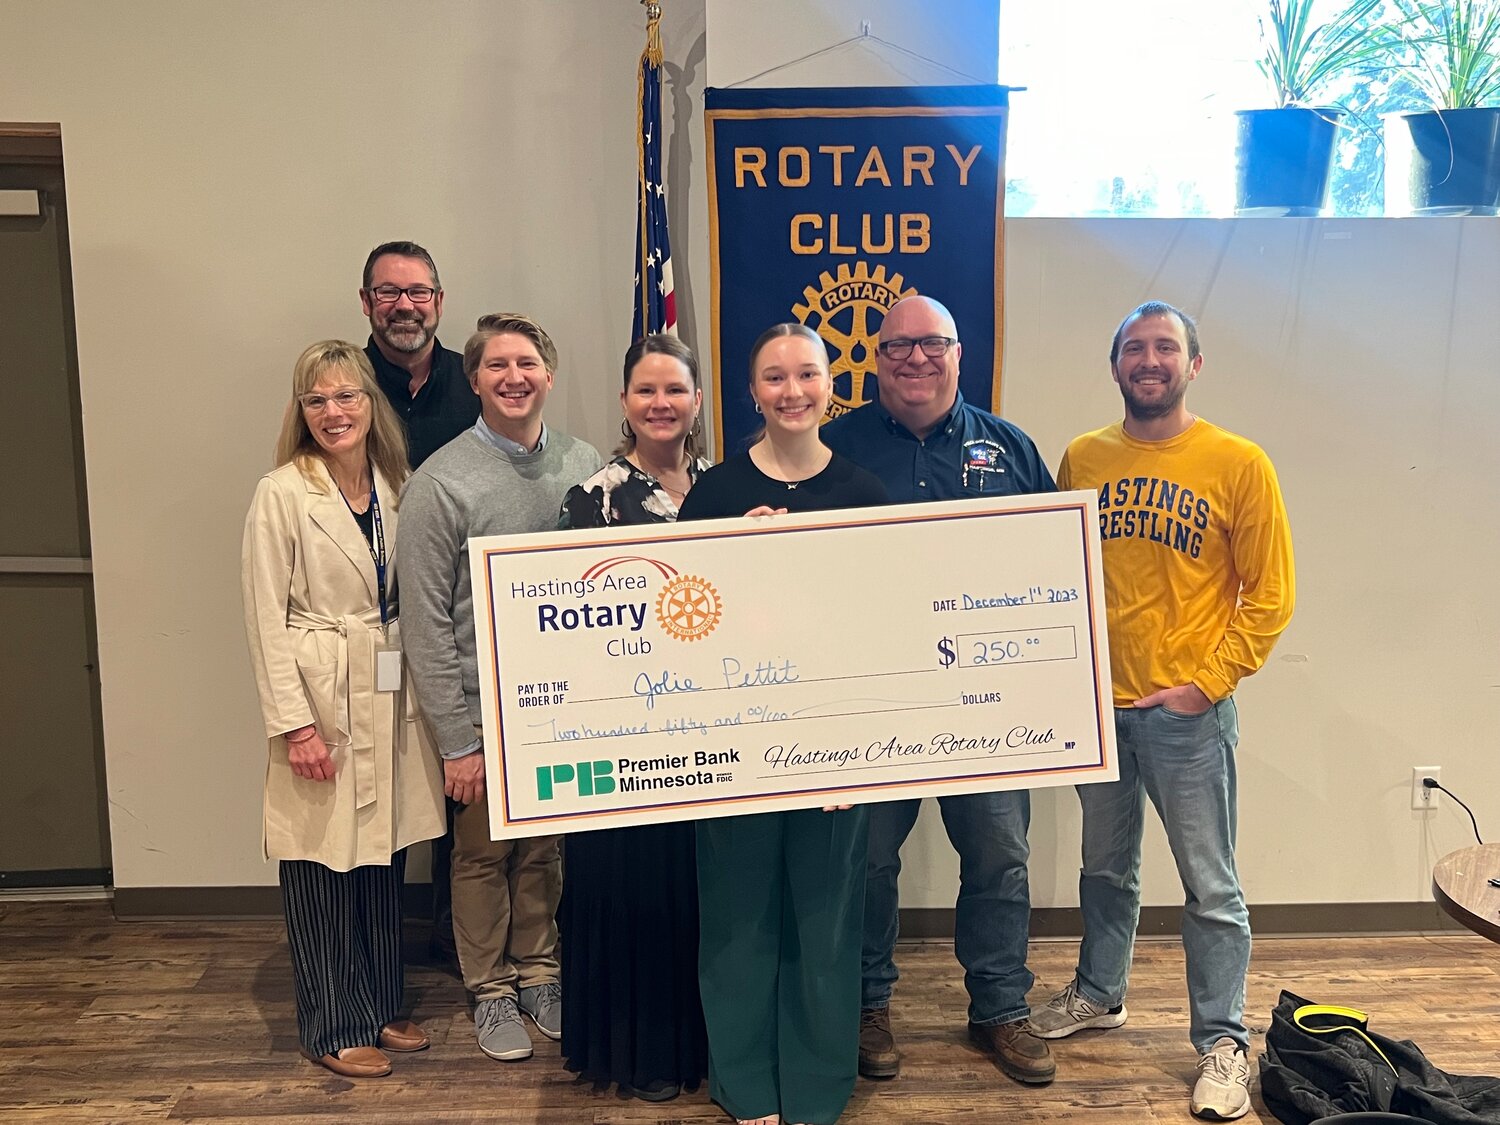 Jolie Pettit was honored as the November Hastings Rotary Club Student of the month. Pettit is pictured holding the check, flanked by her parents, Jessica and Joe and Hastings Schools staff members (from left) Superintendent Dr. Tamara Champa, High School Principal Scott Dorn, French teacher Anthony Letourneau and Hastings wrestling coach Tim Haneberg.